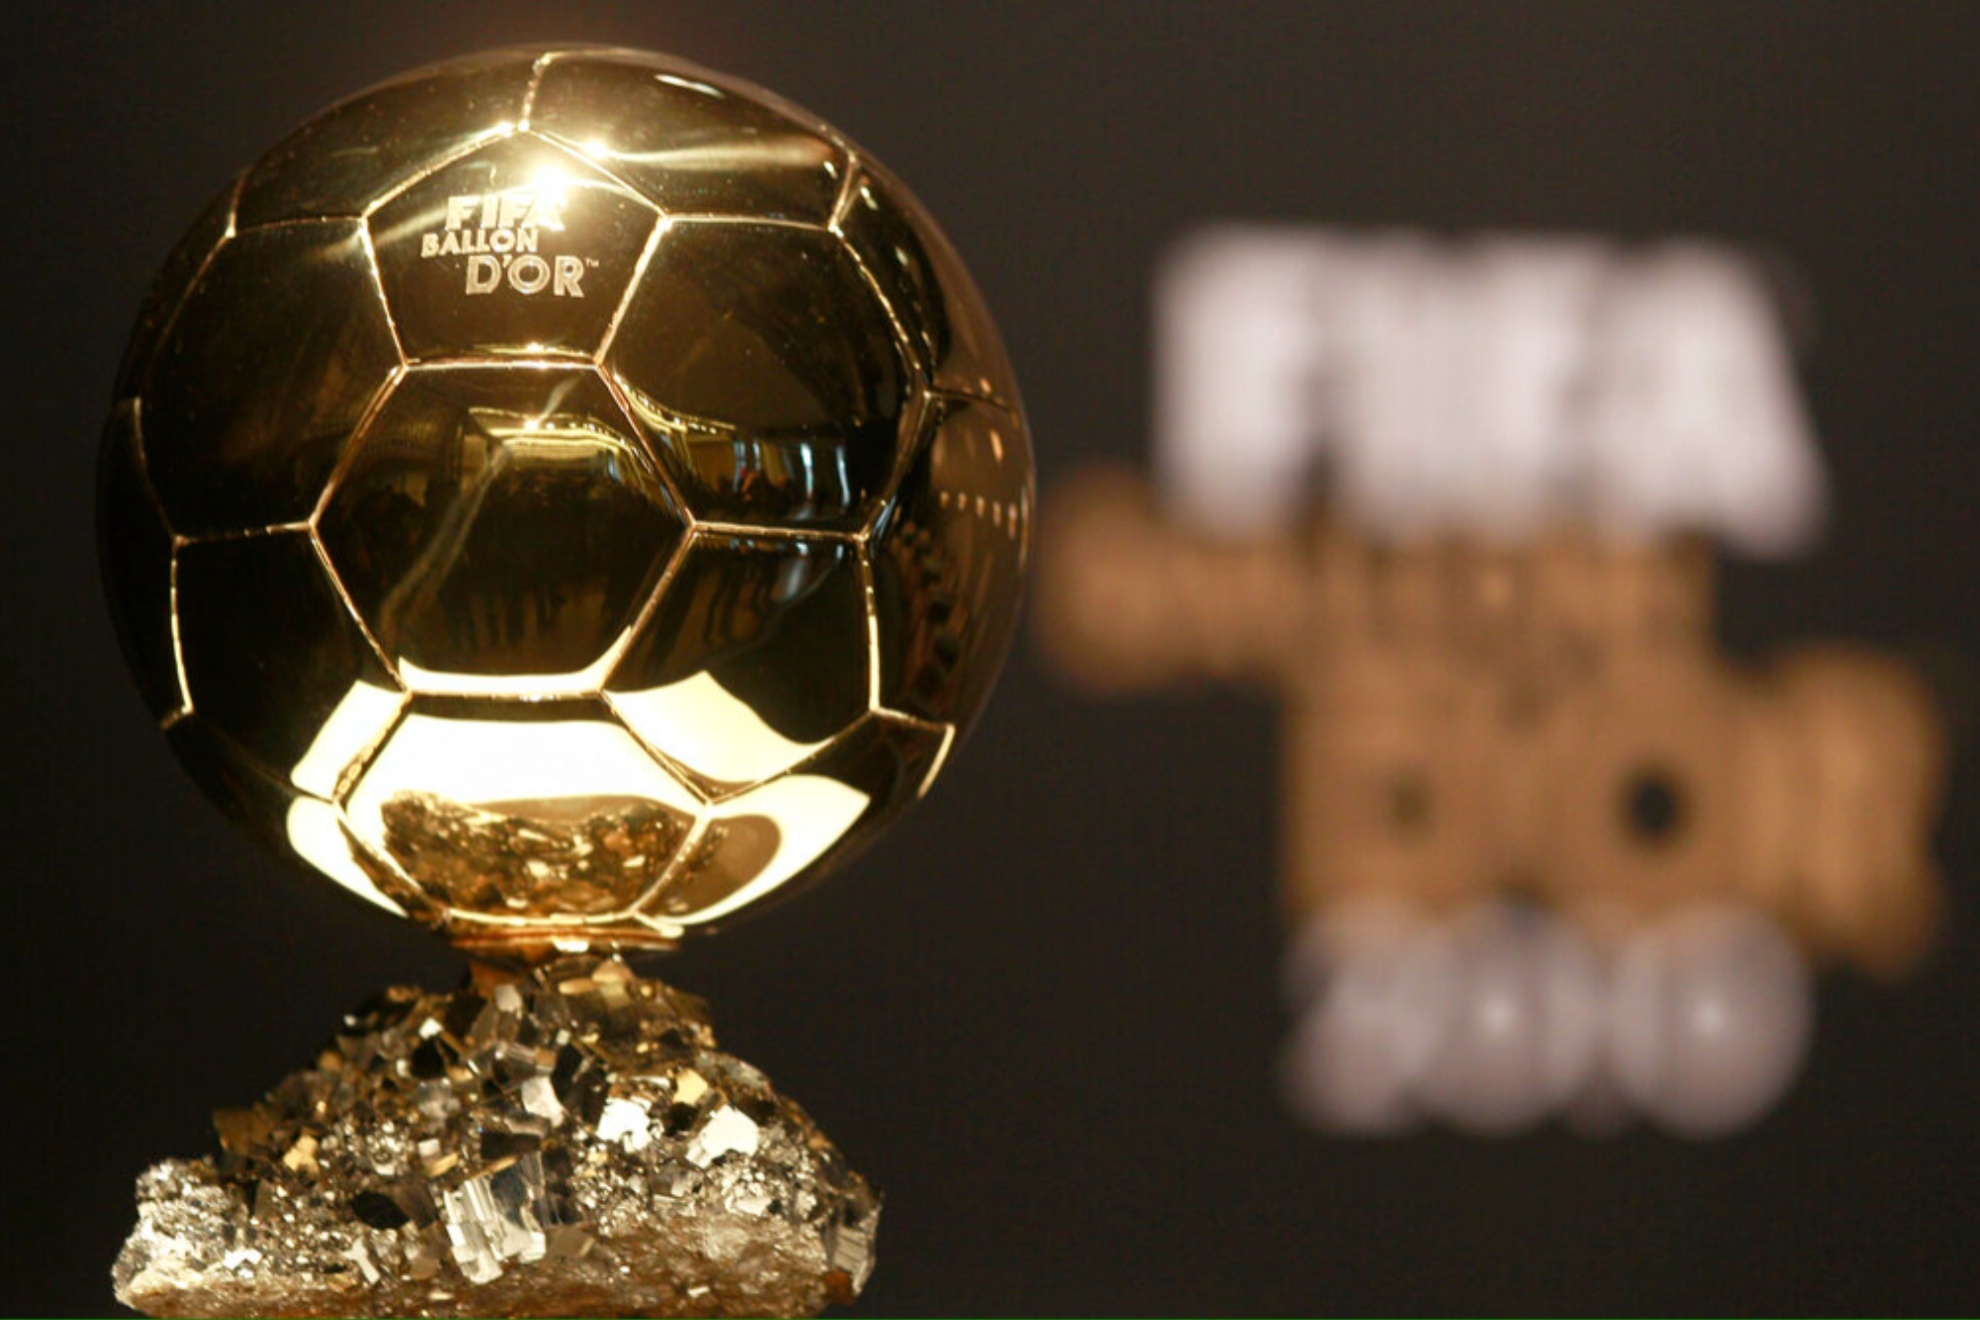 The famed Ballon d'Or ceremony is taking place in Paris on Monday night